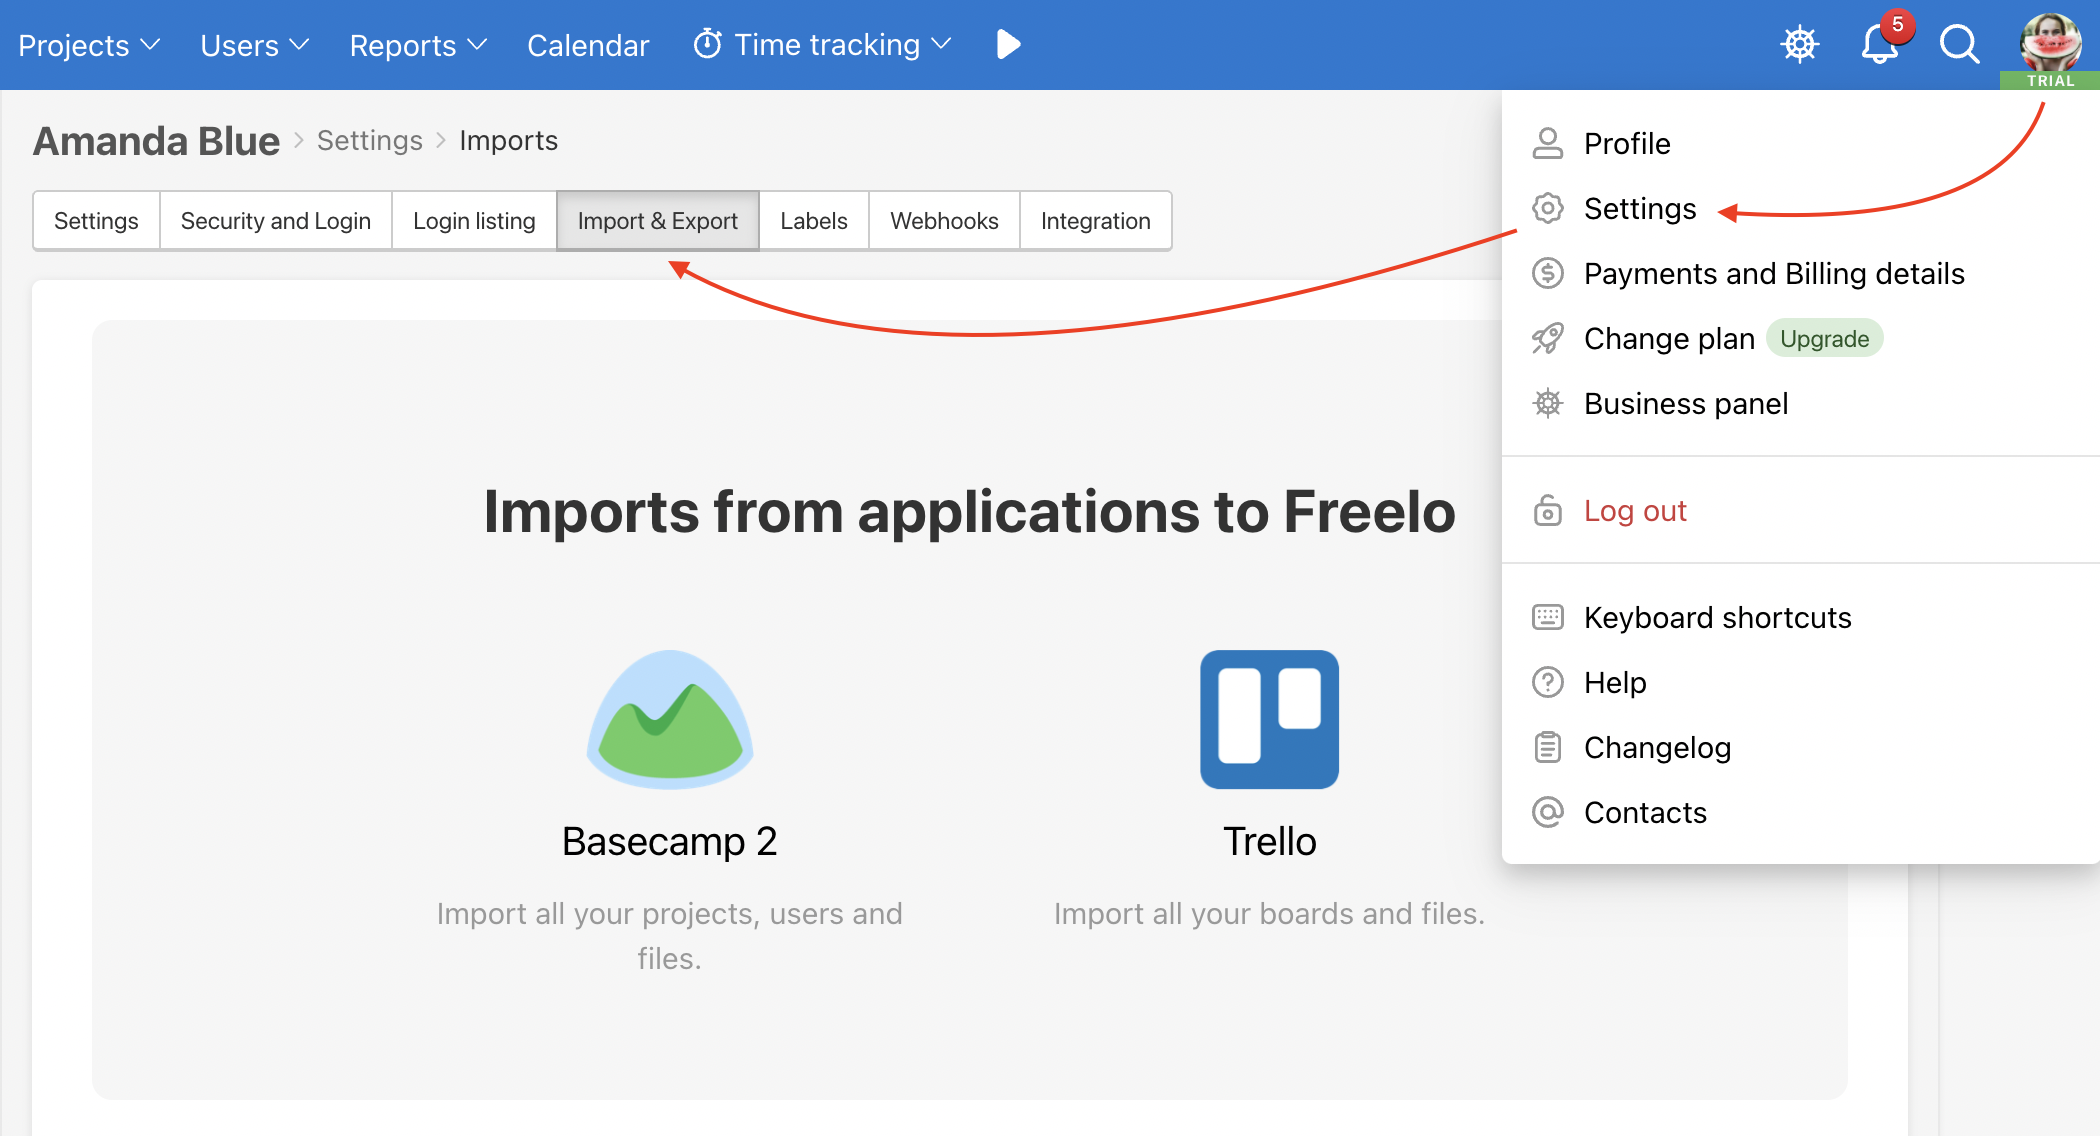 To export data from Freelo, go to Settings.